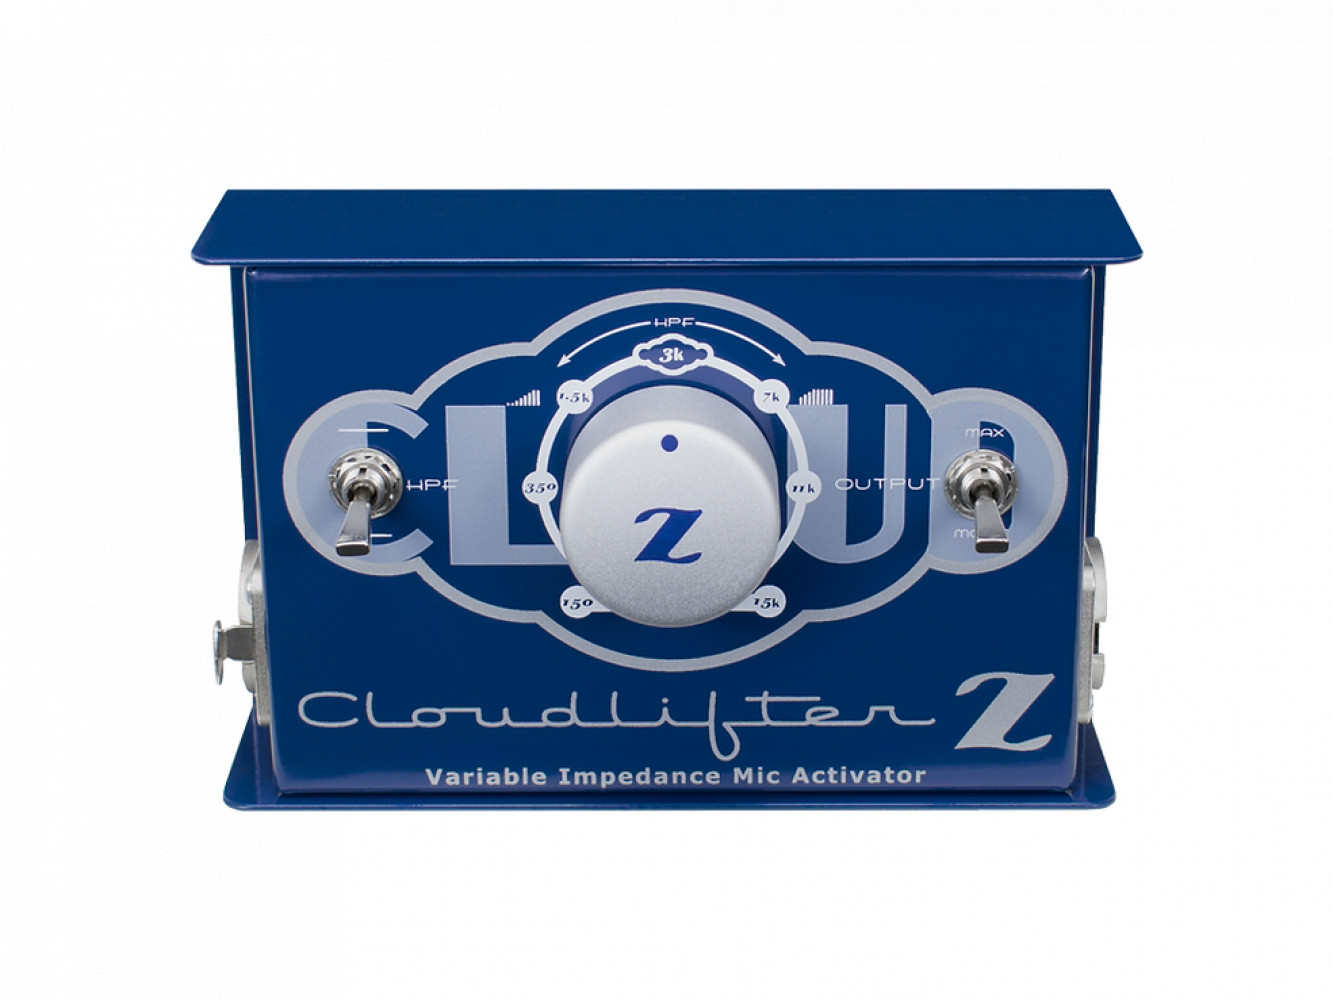 Cloud Microphones Cloudlifter CL-Z Mic Activator with Variable Impedance